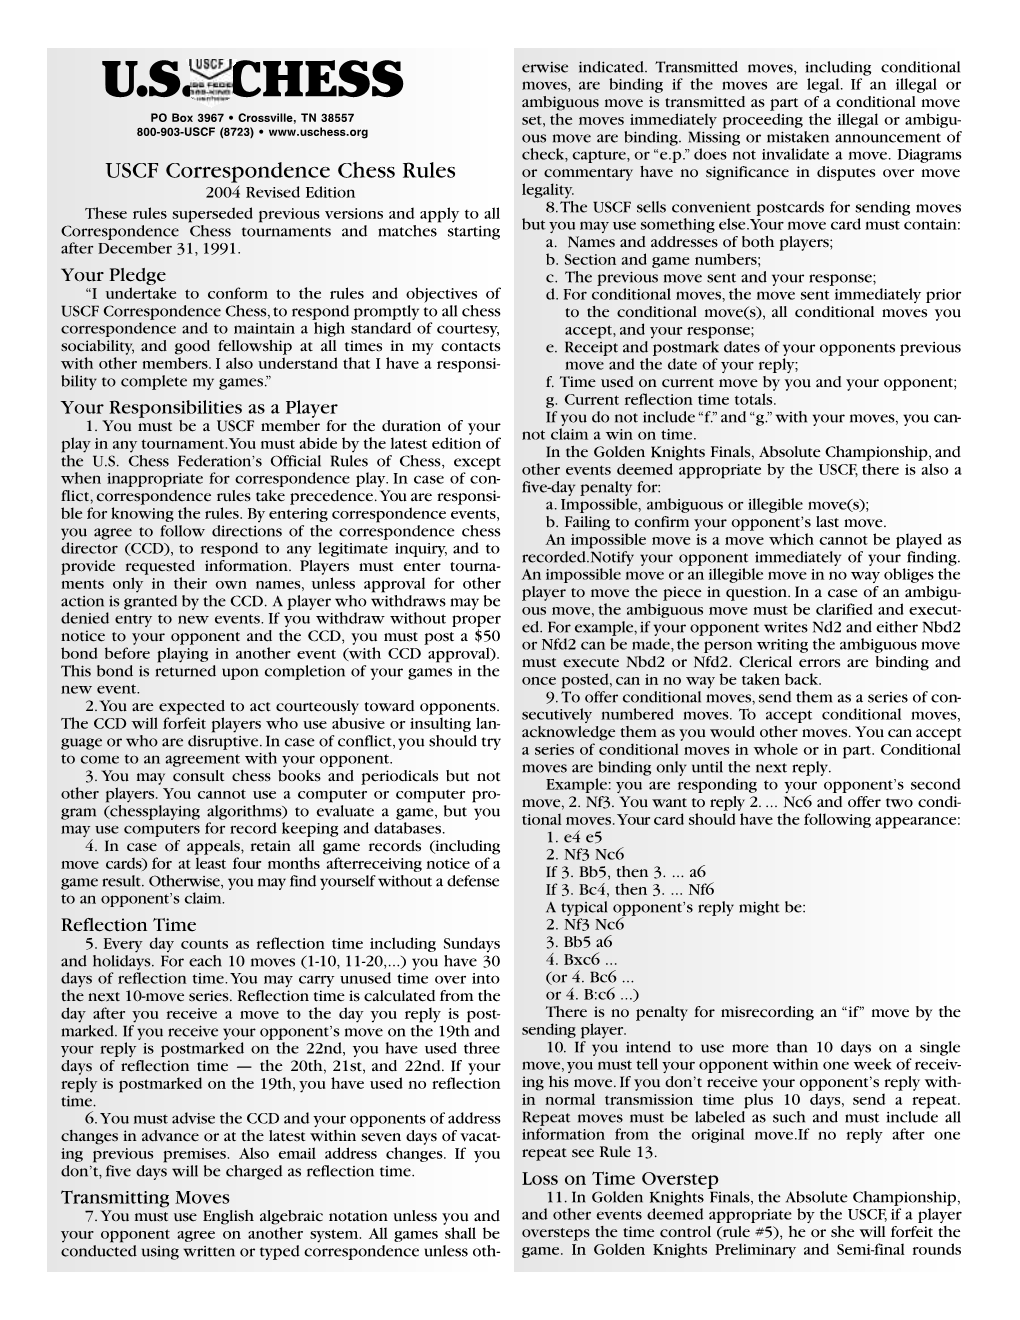 Correspondence Chess Rules Pamphlet